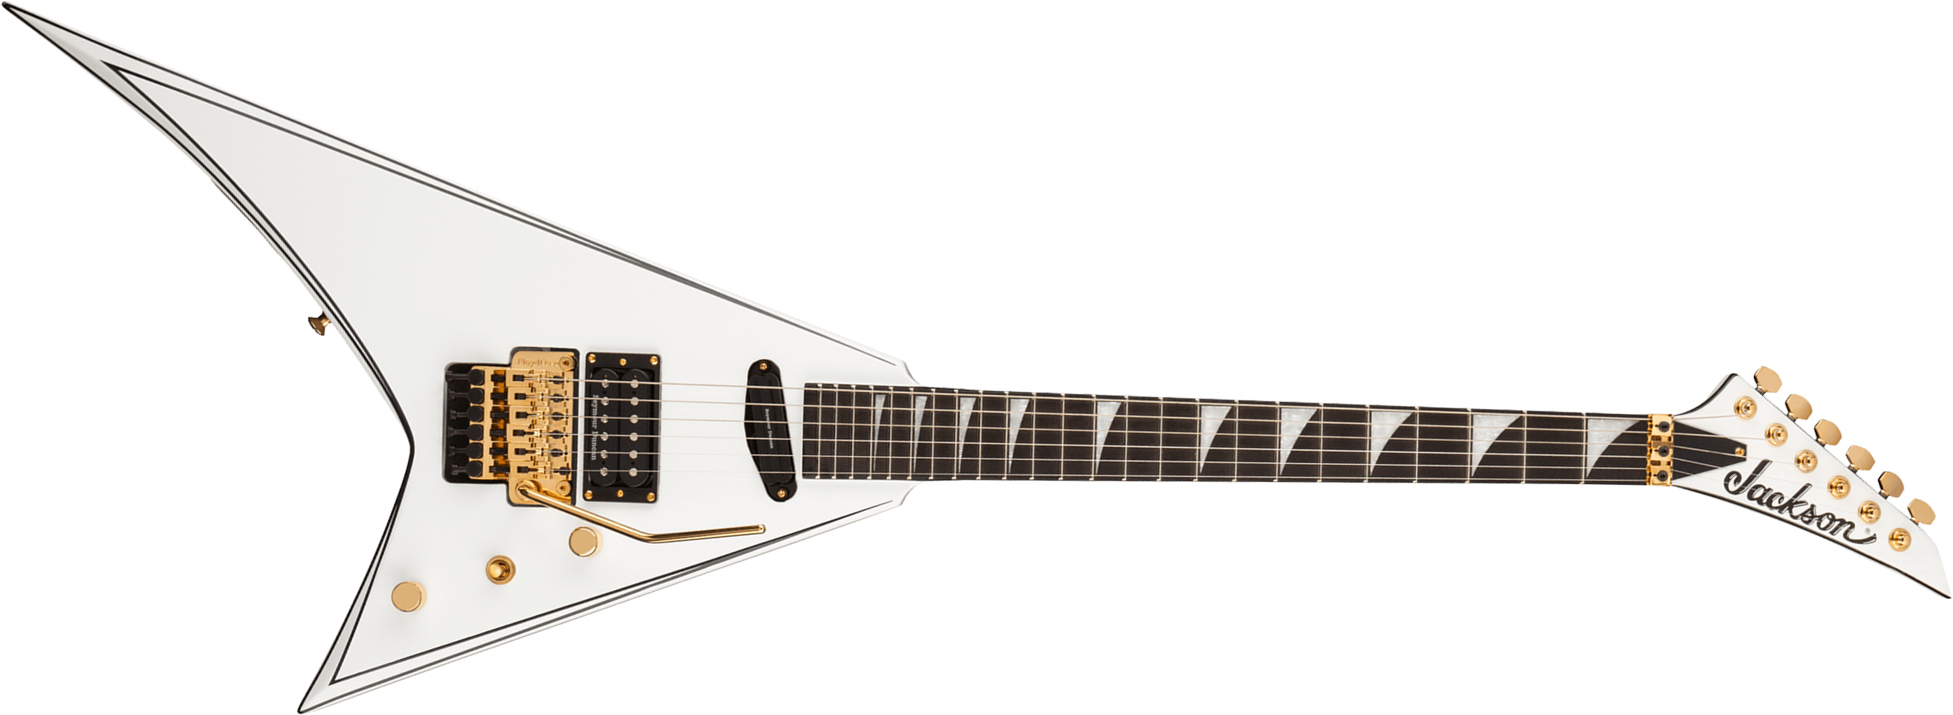 Jackson Rhoads Rr24 Hs Concept Hst Seymour Duncan Fr Eb - White With Black Pinstripes - Metal electric guitar - Main picture